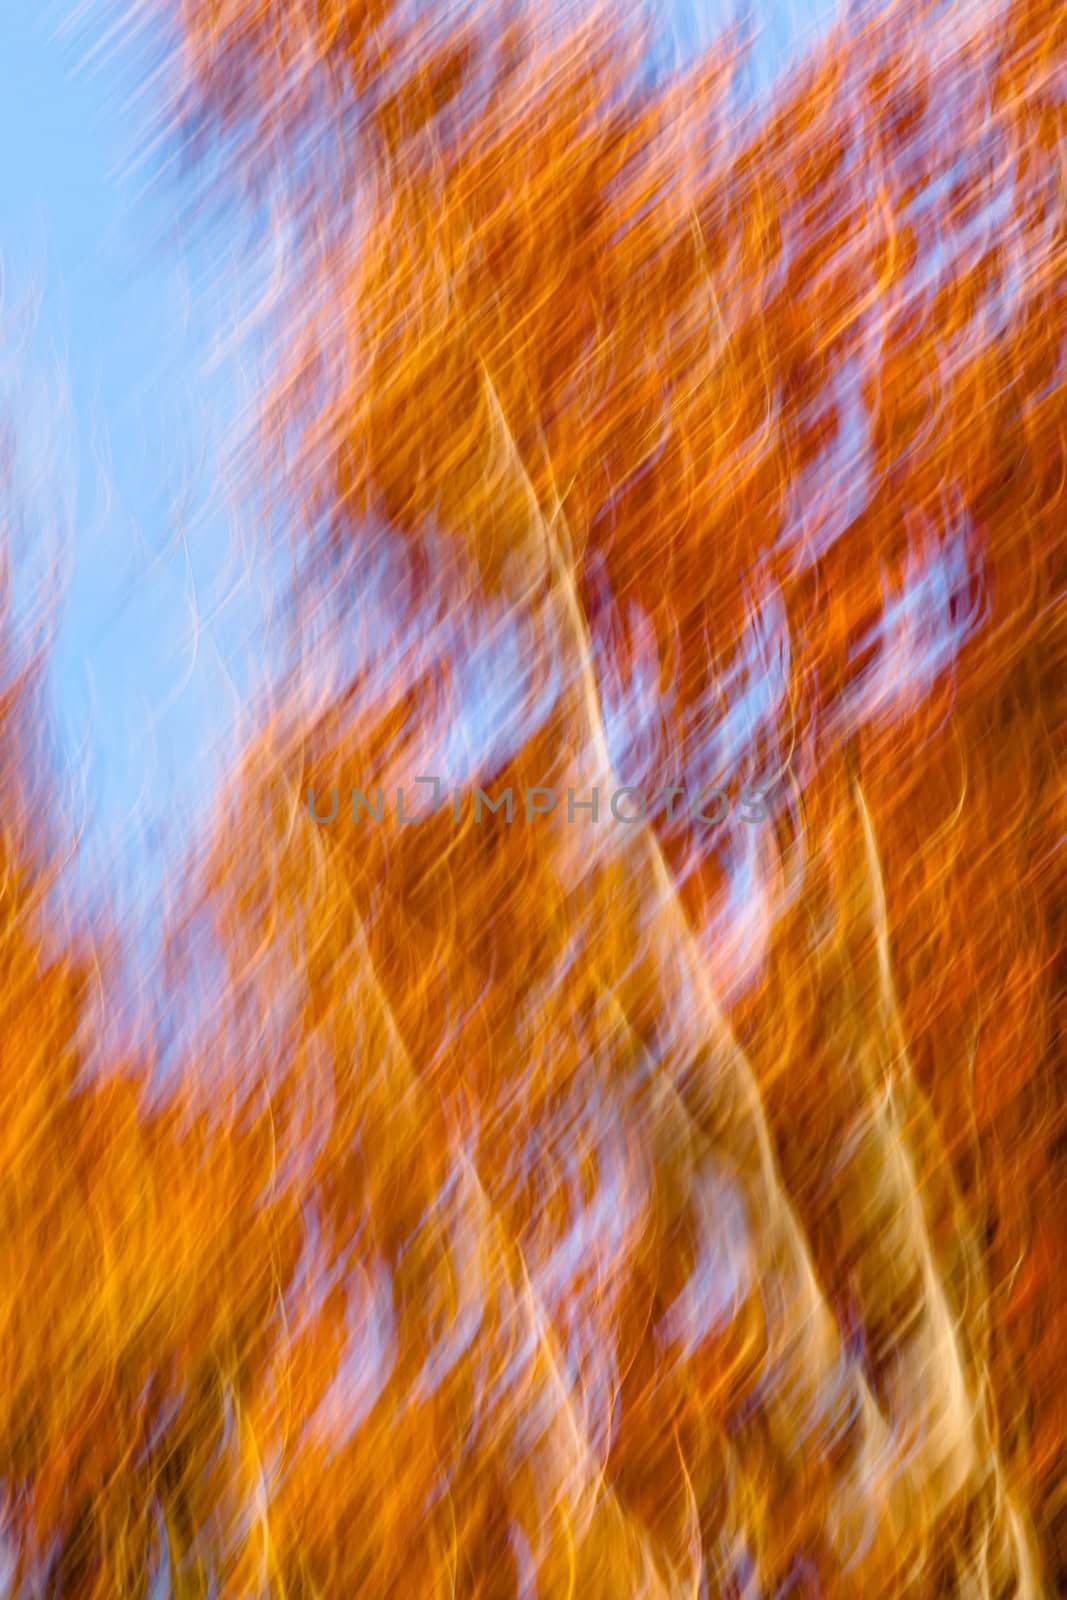 Motion blur of trees in an autumn forest by palinchak